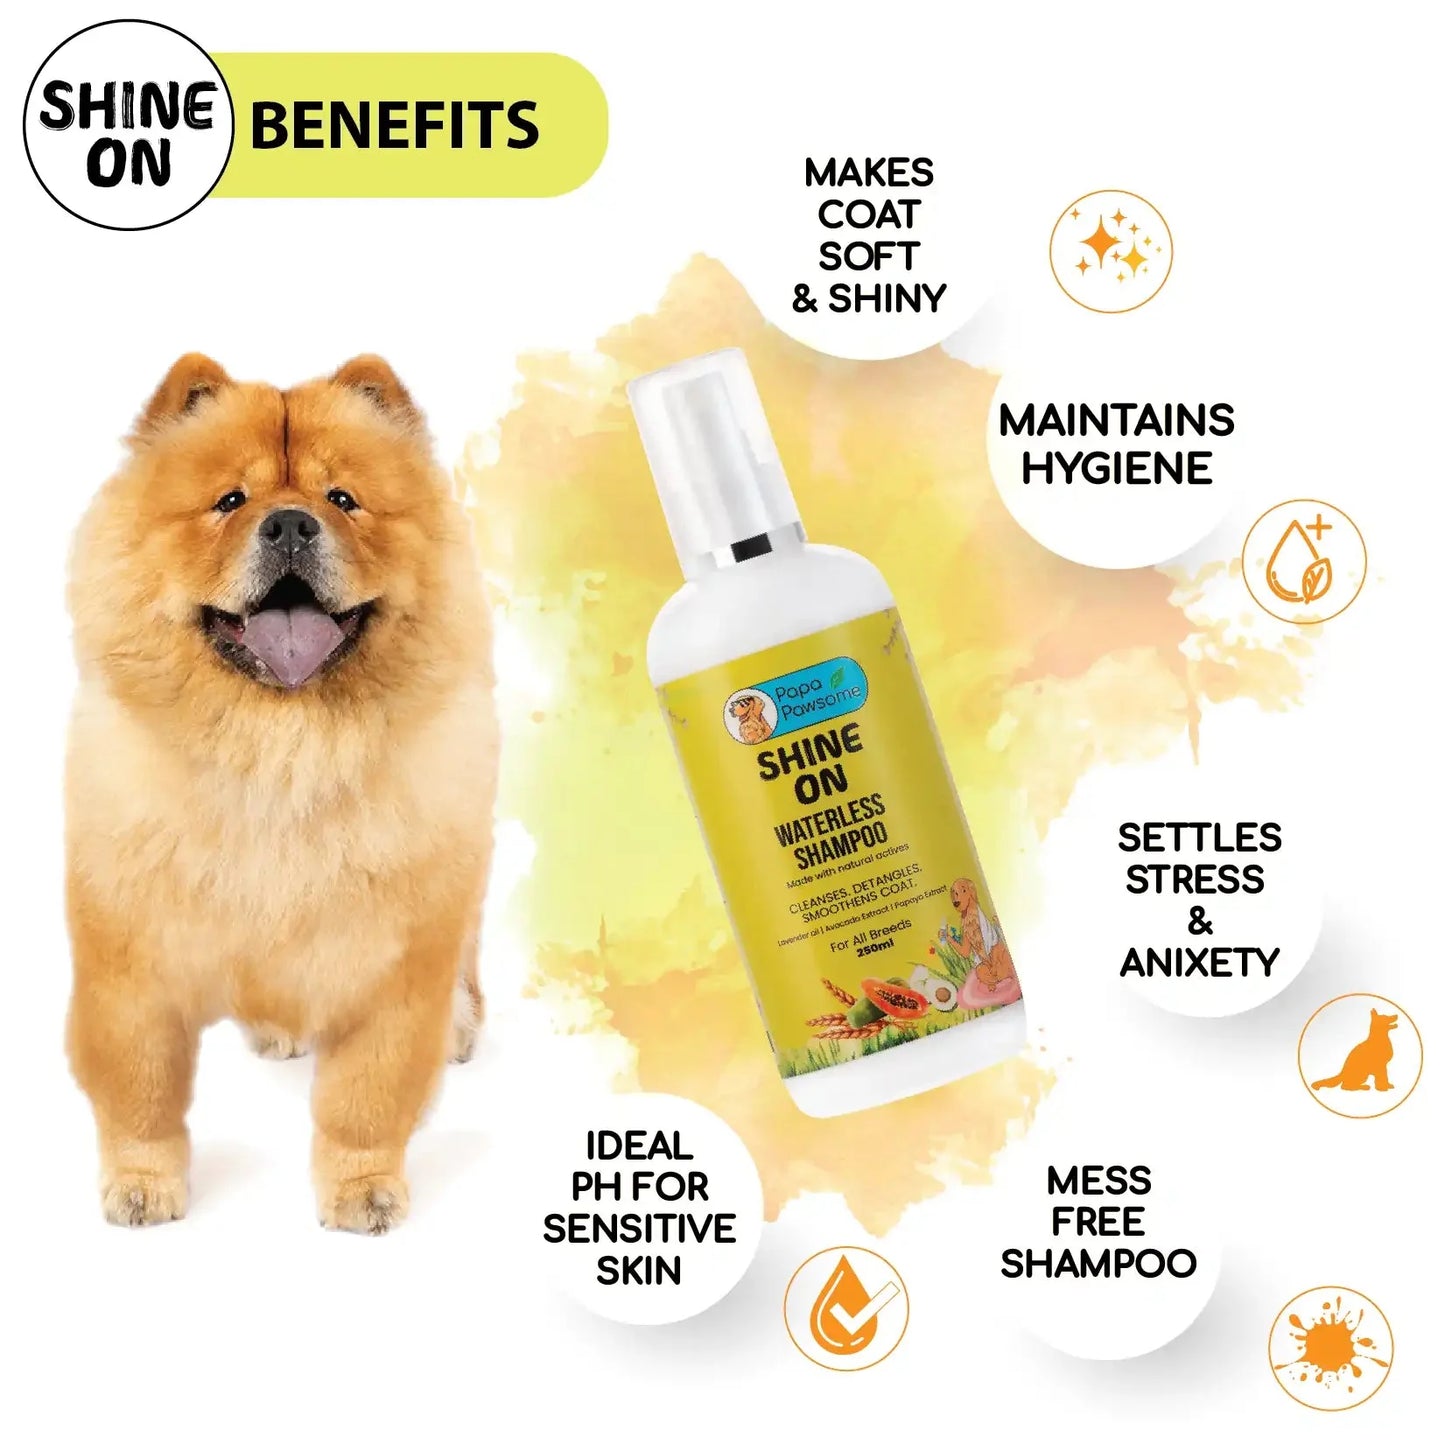 Benefits of dog waterless shampoo: makes coat soft and shiny, maintain hygiene, settles stress and anxiety, mess free shampoo, Ideal ph for sensitive skin